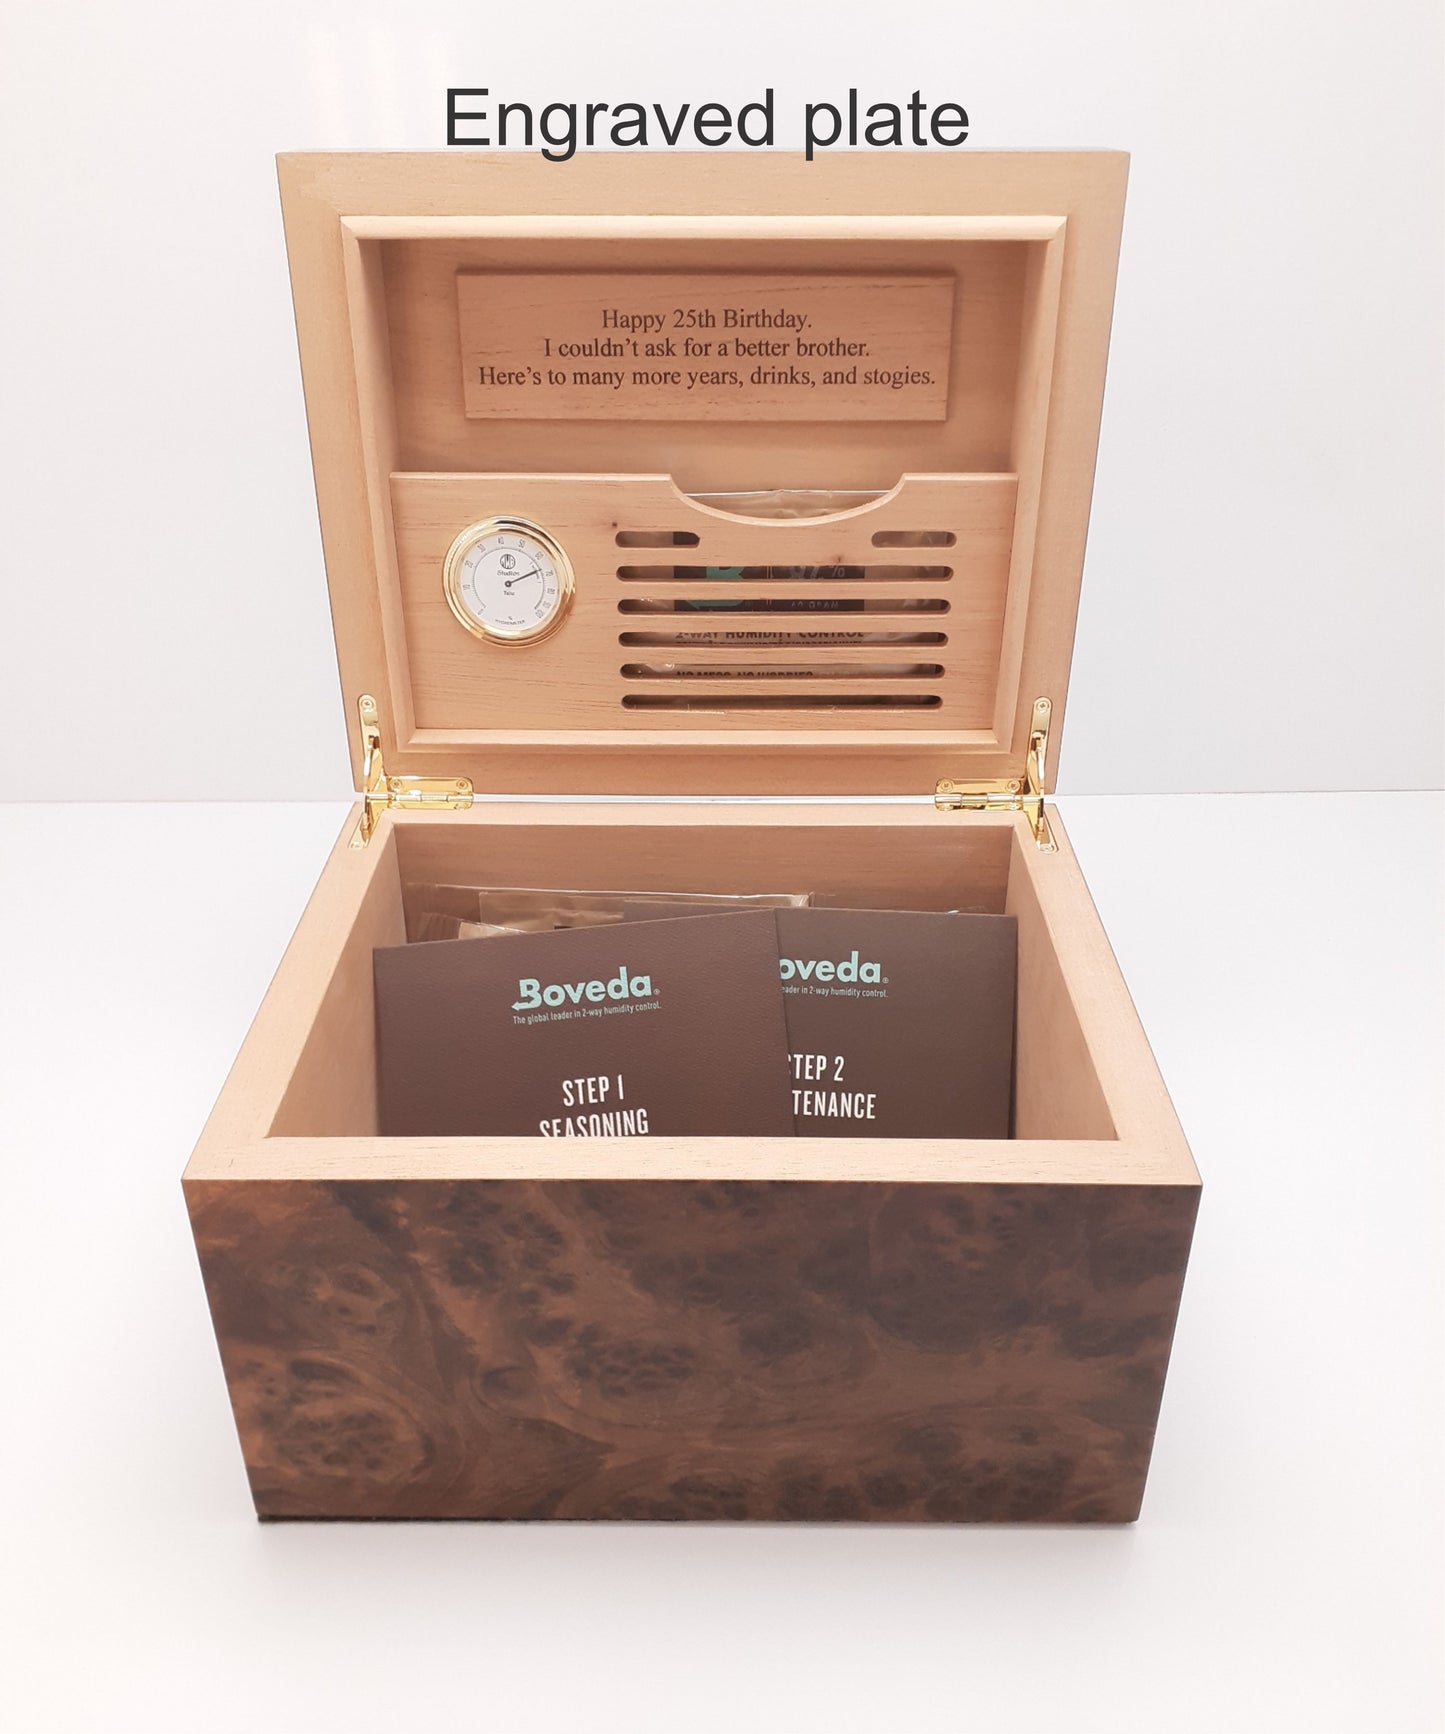 Custom Handcrafted Humidor  50 count.  Made in the U.S.